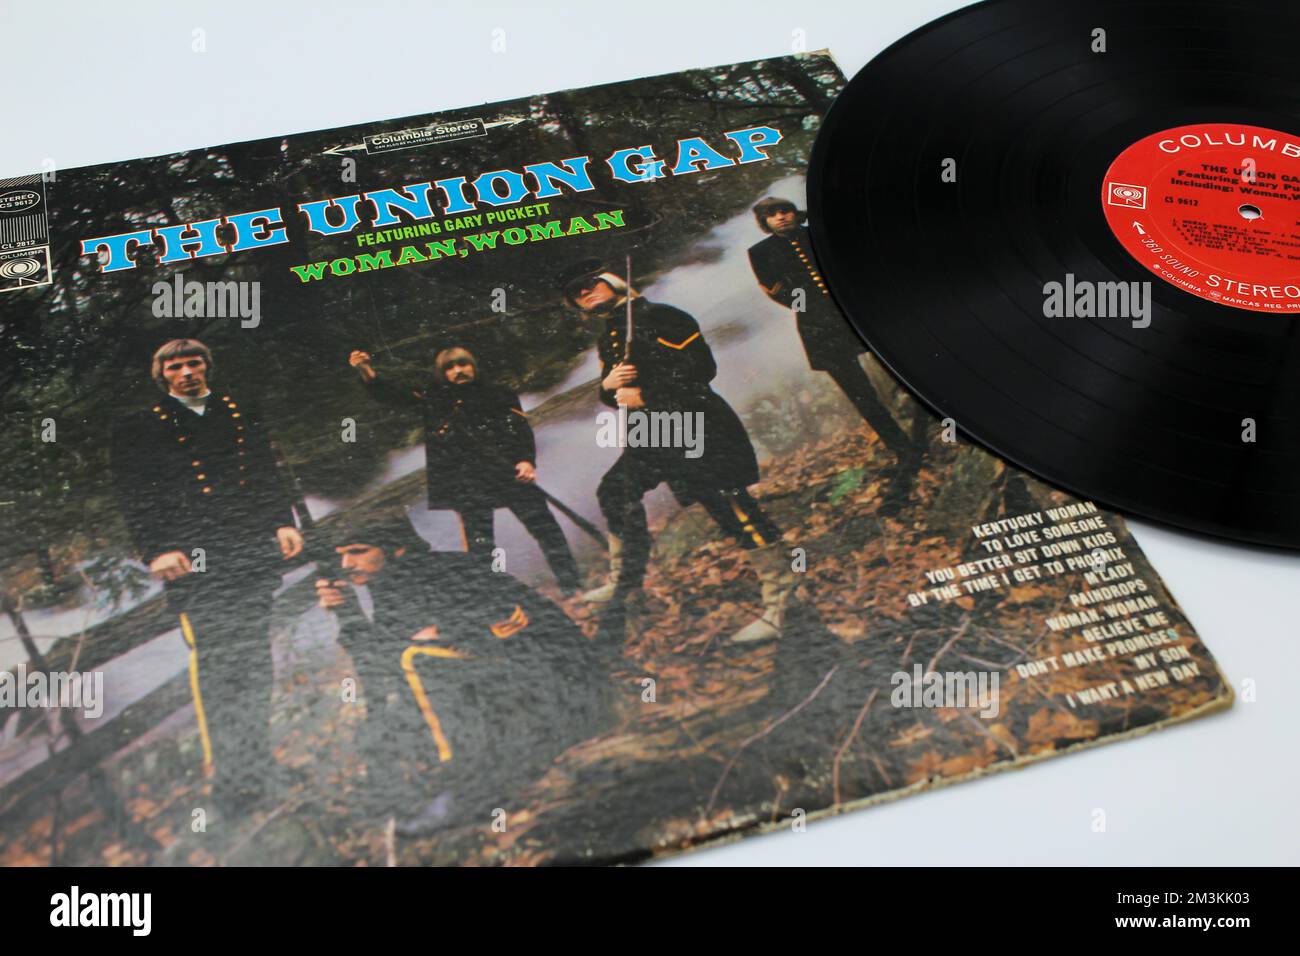 Woman, Woman is the Gold-selling debut album by Gary Puckett and The Union Gap, on vinyl record LP disc. Stock Photo